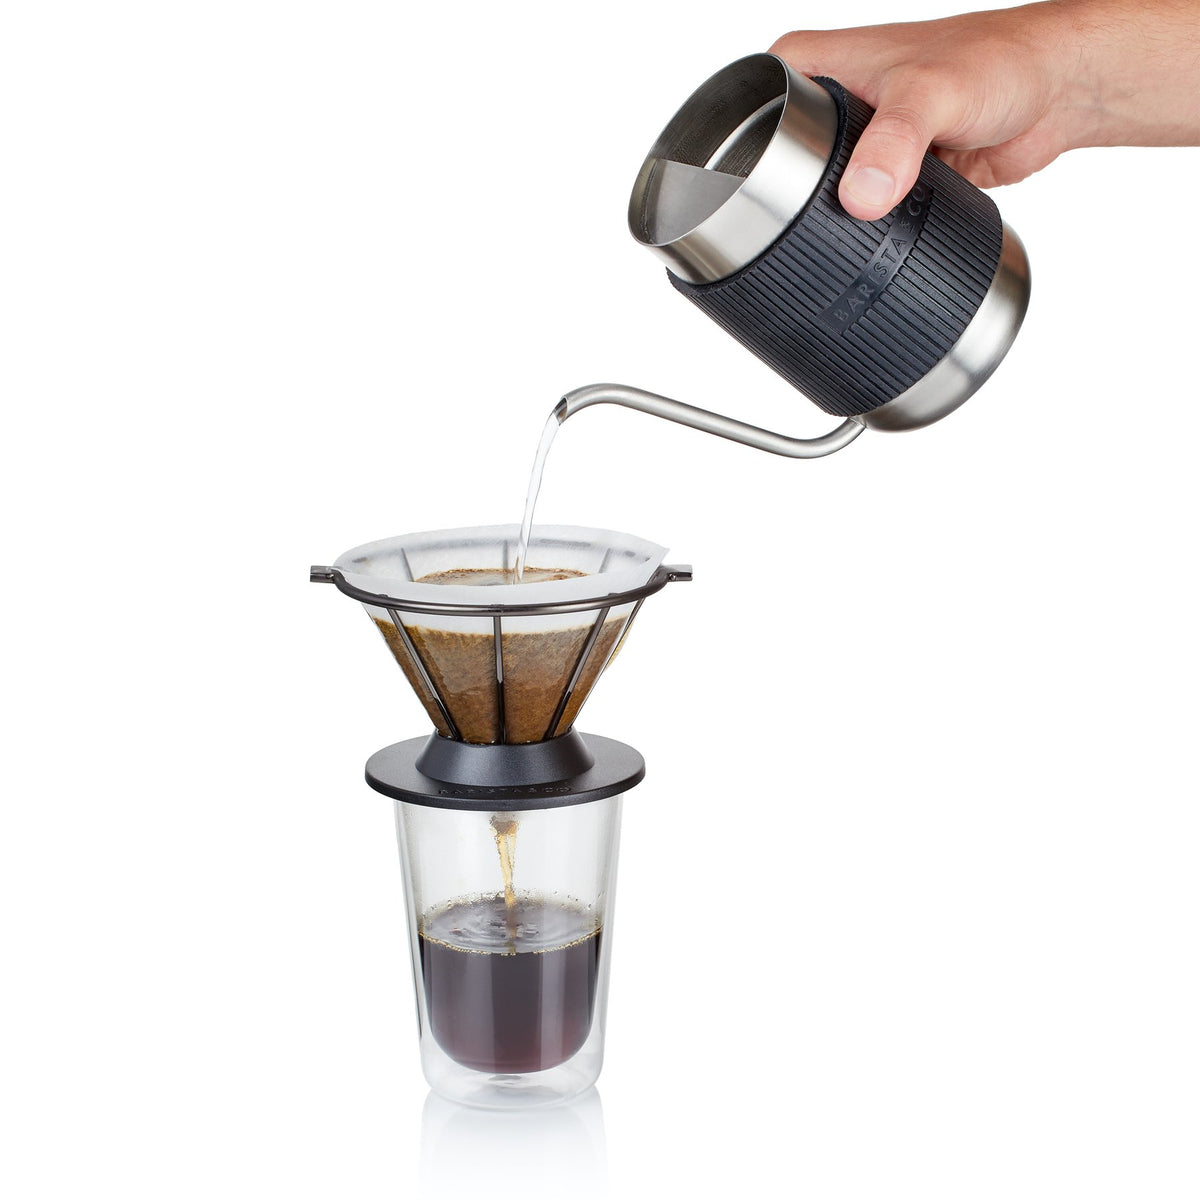 Corral Pour Over Coffee Maker